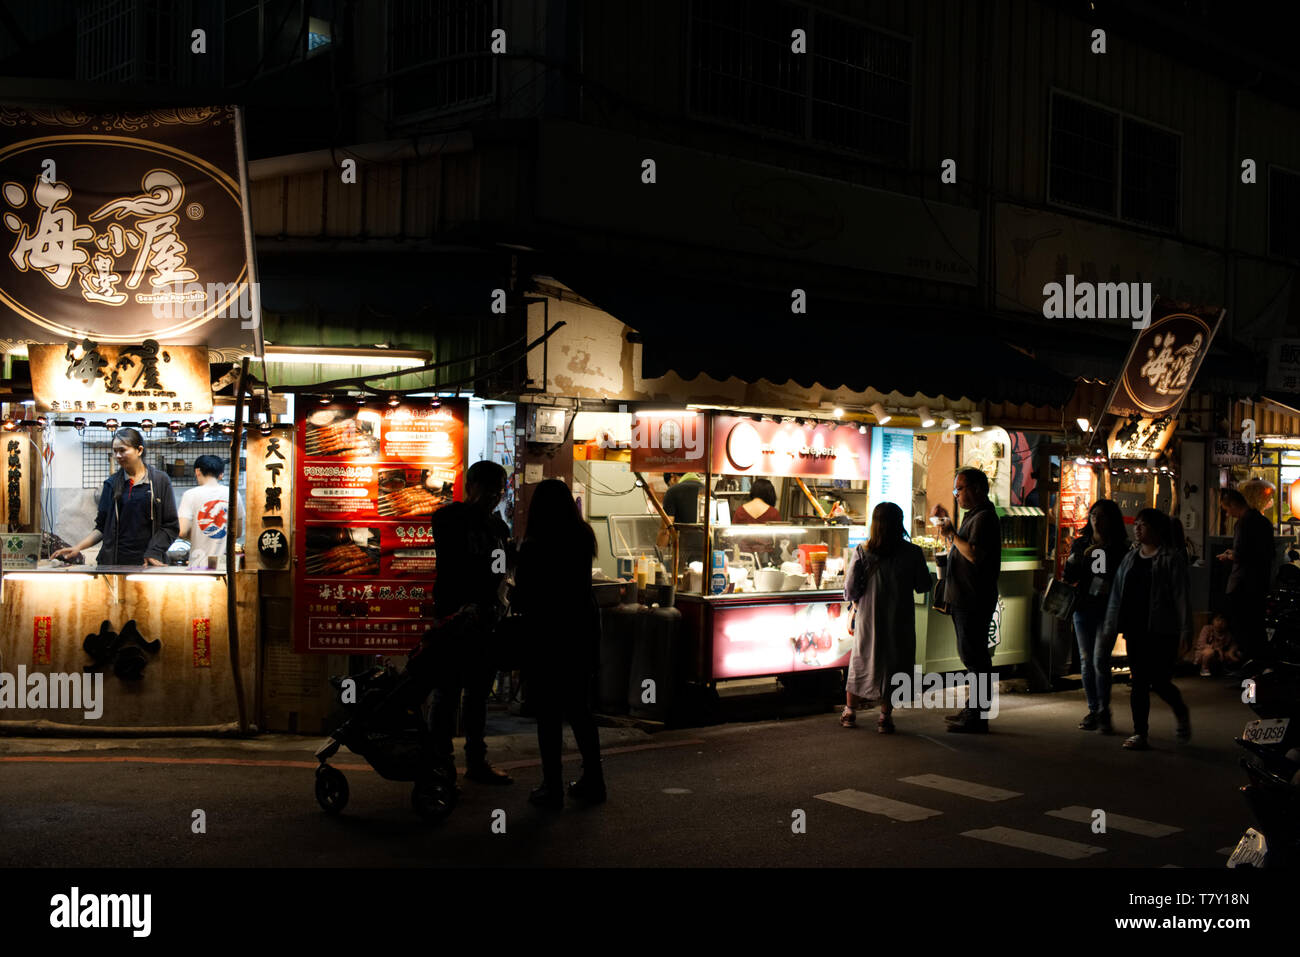 Tour in the night markets of Taiwan Stock Photo